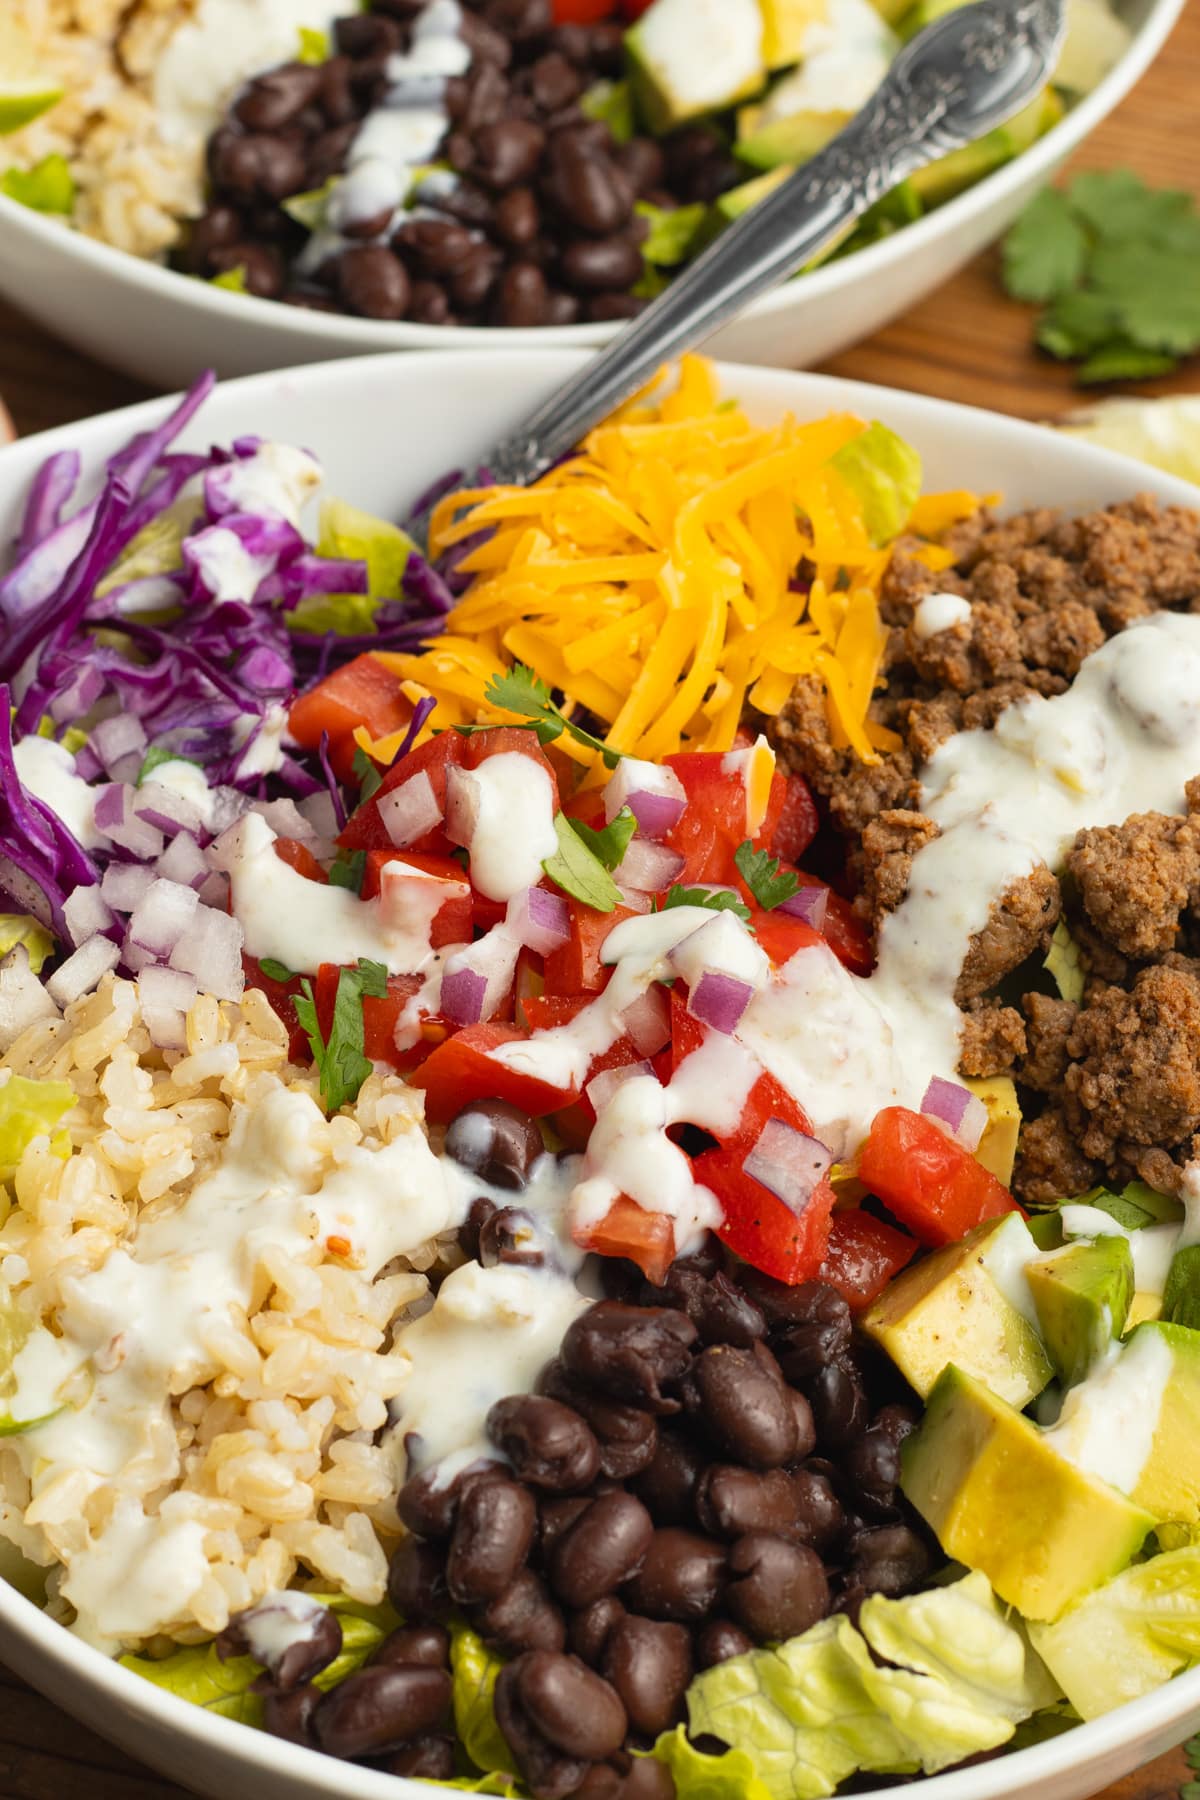 This is a close-up picture of a beef taco bowl.